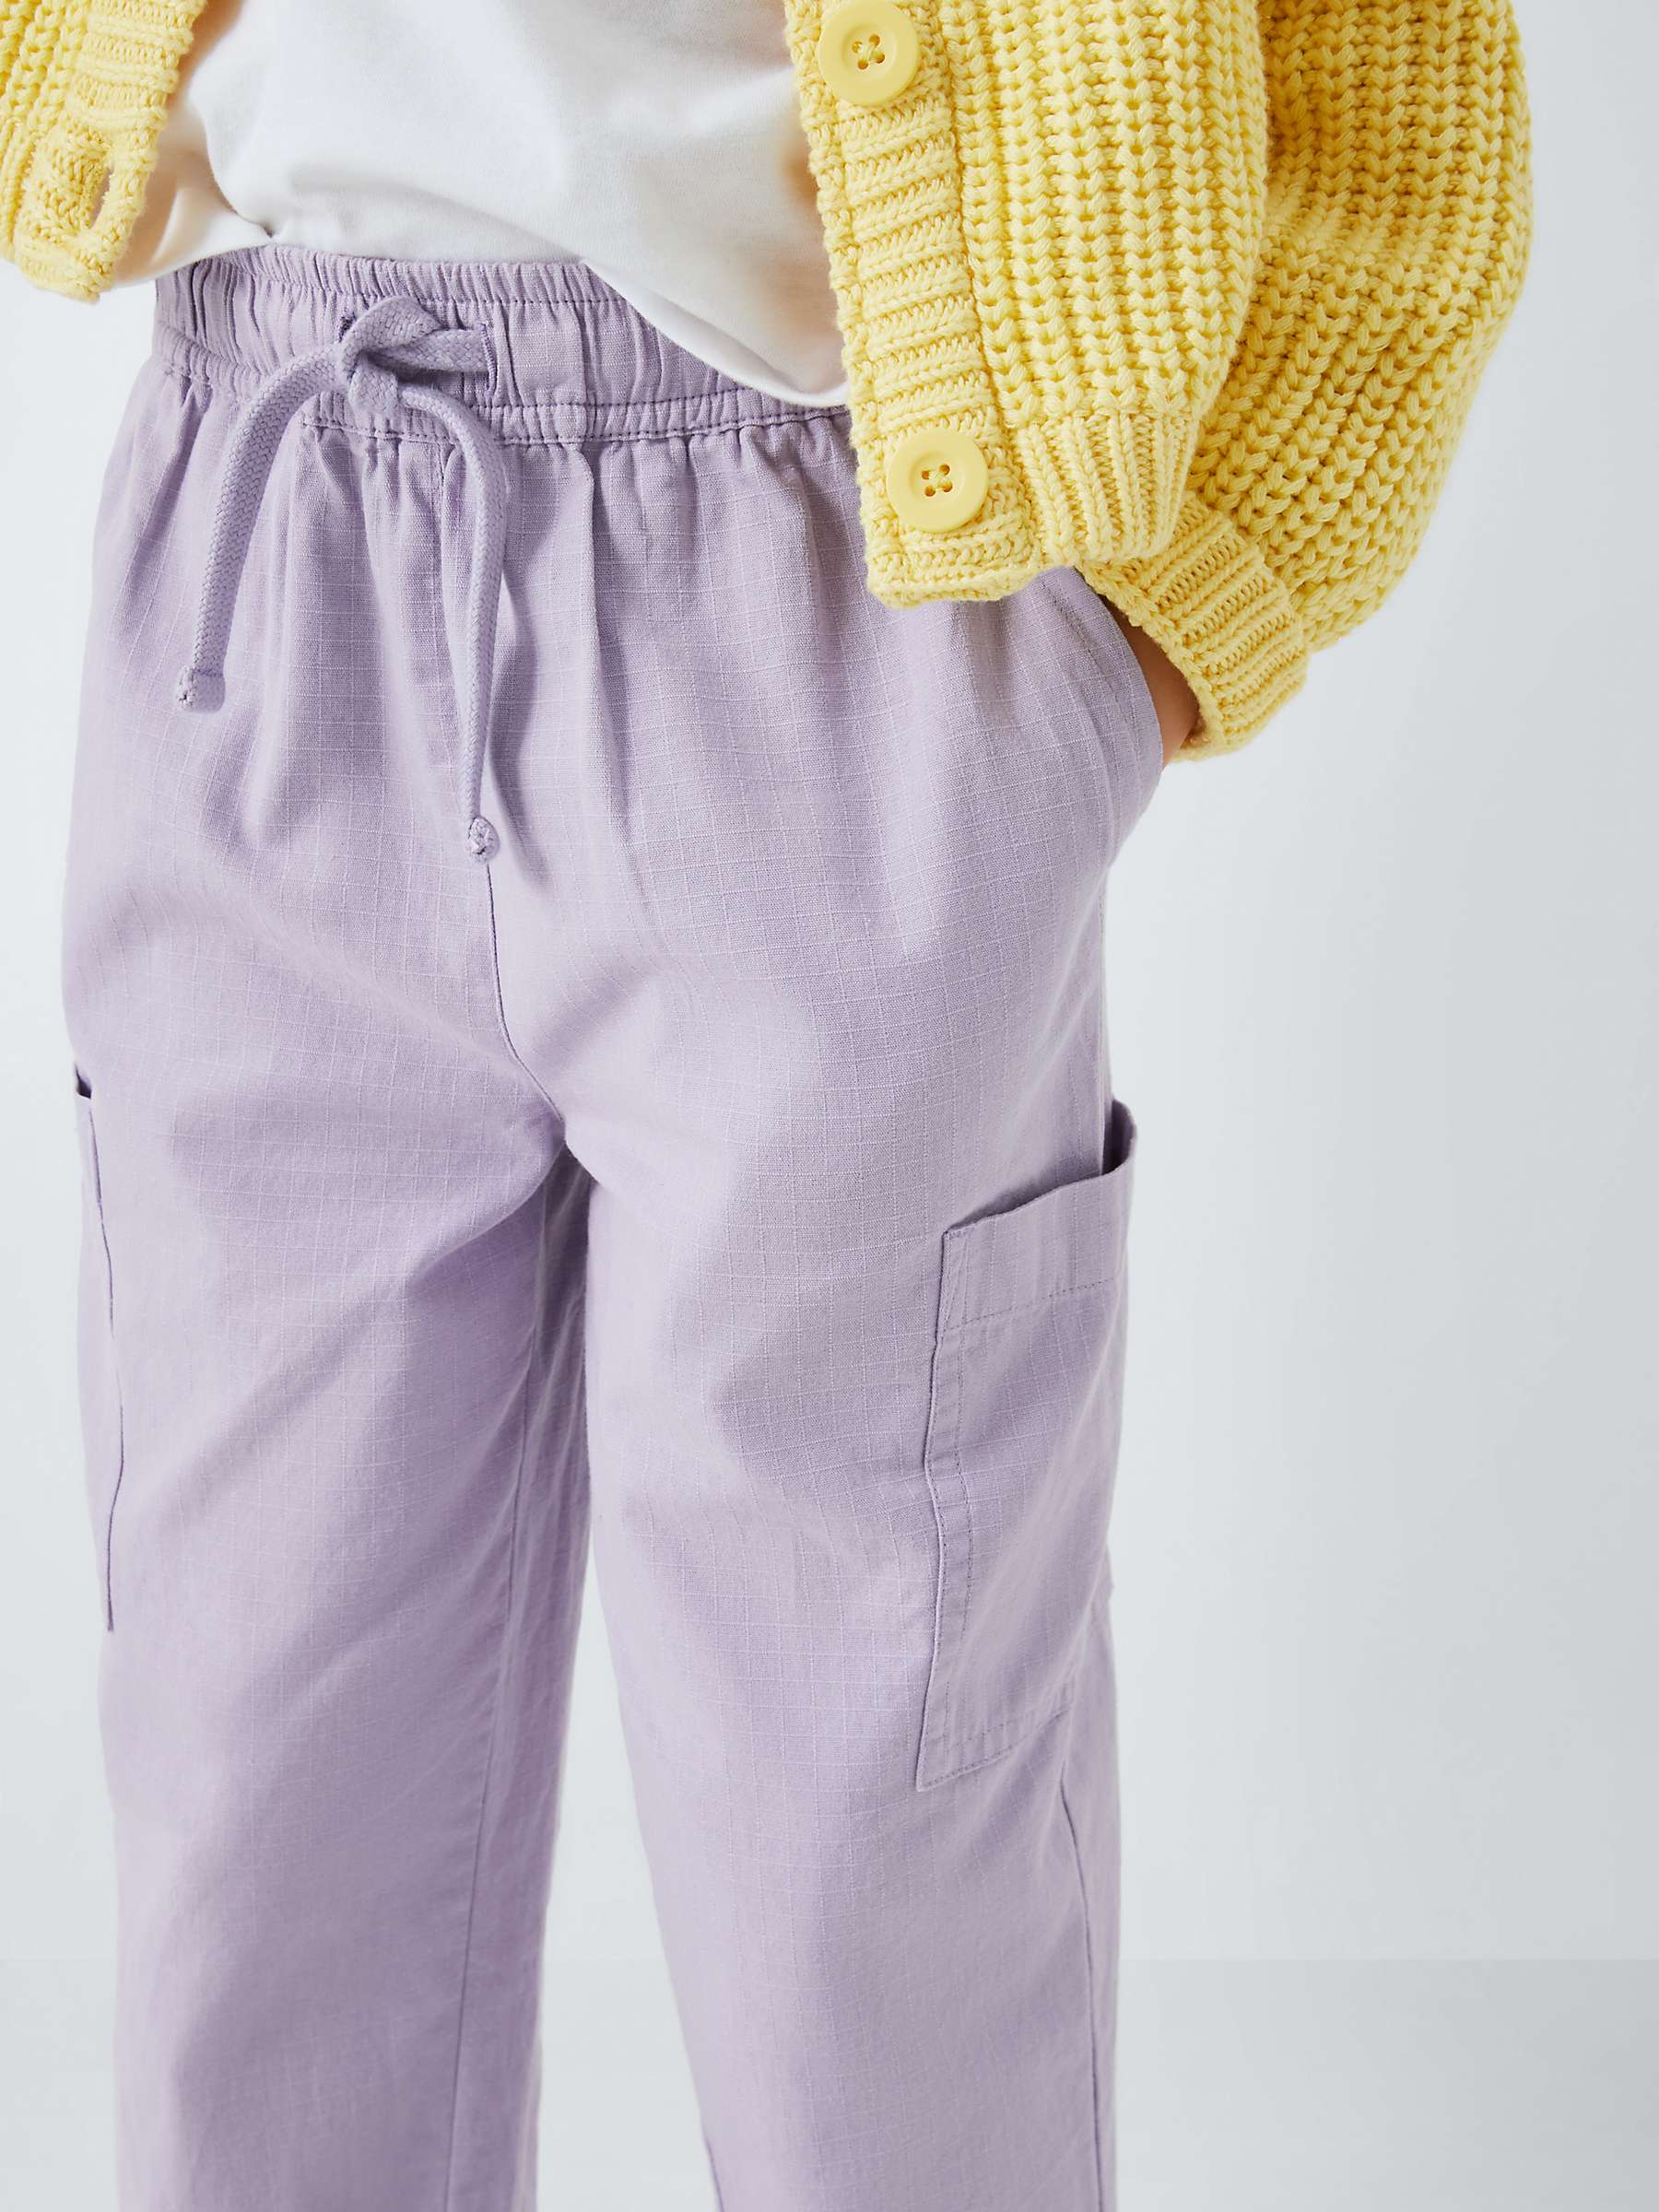 Buy John Lewis ANYDAY Kids' Ripstop Cotton Trousers Online at johnlewis.com